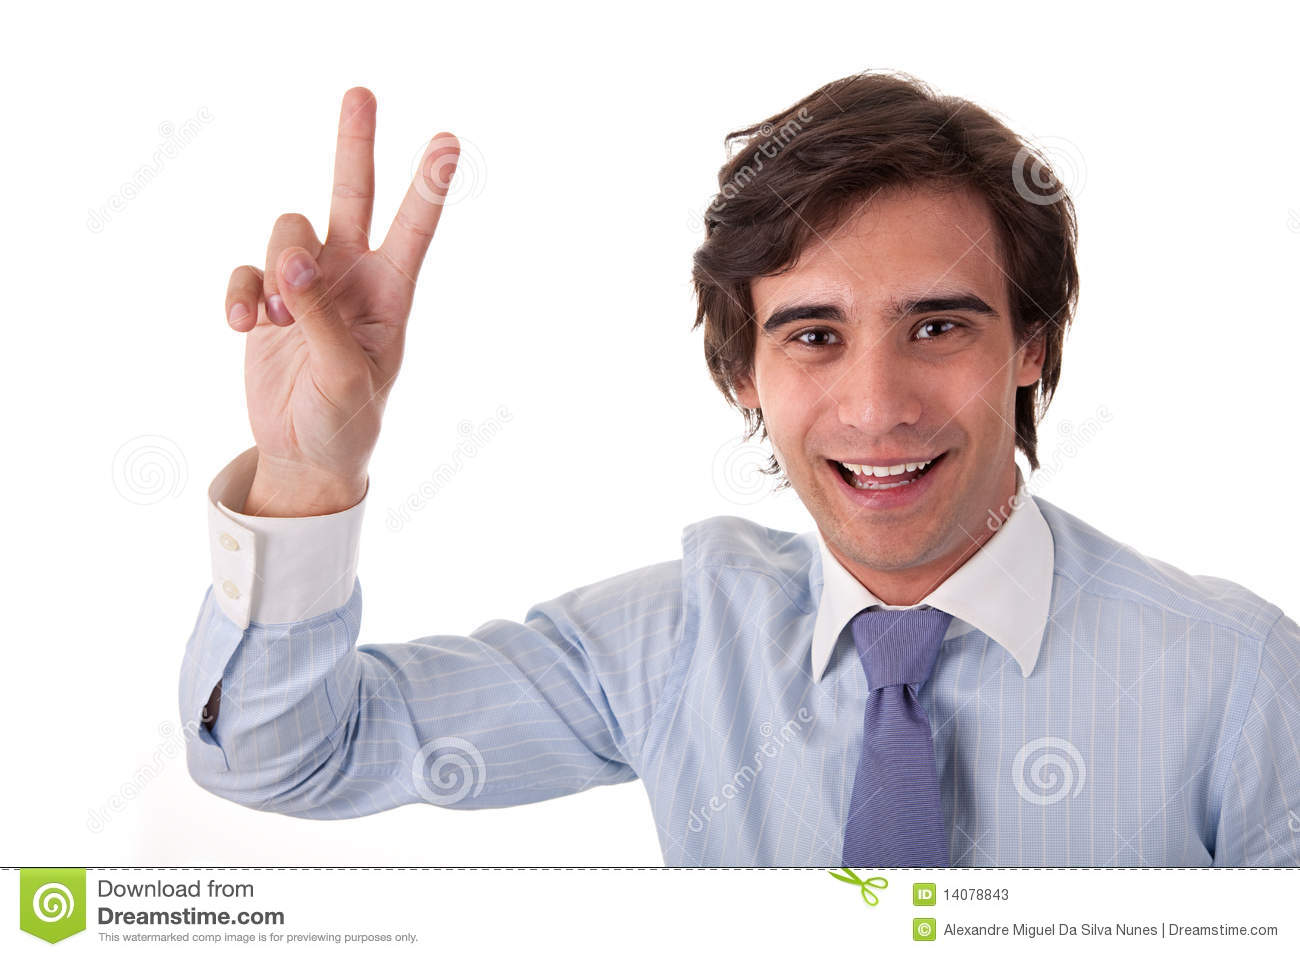 Young Bussiness Man With Arm Raised In Victory Sign Isolated On White